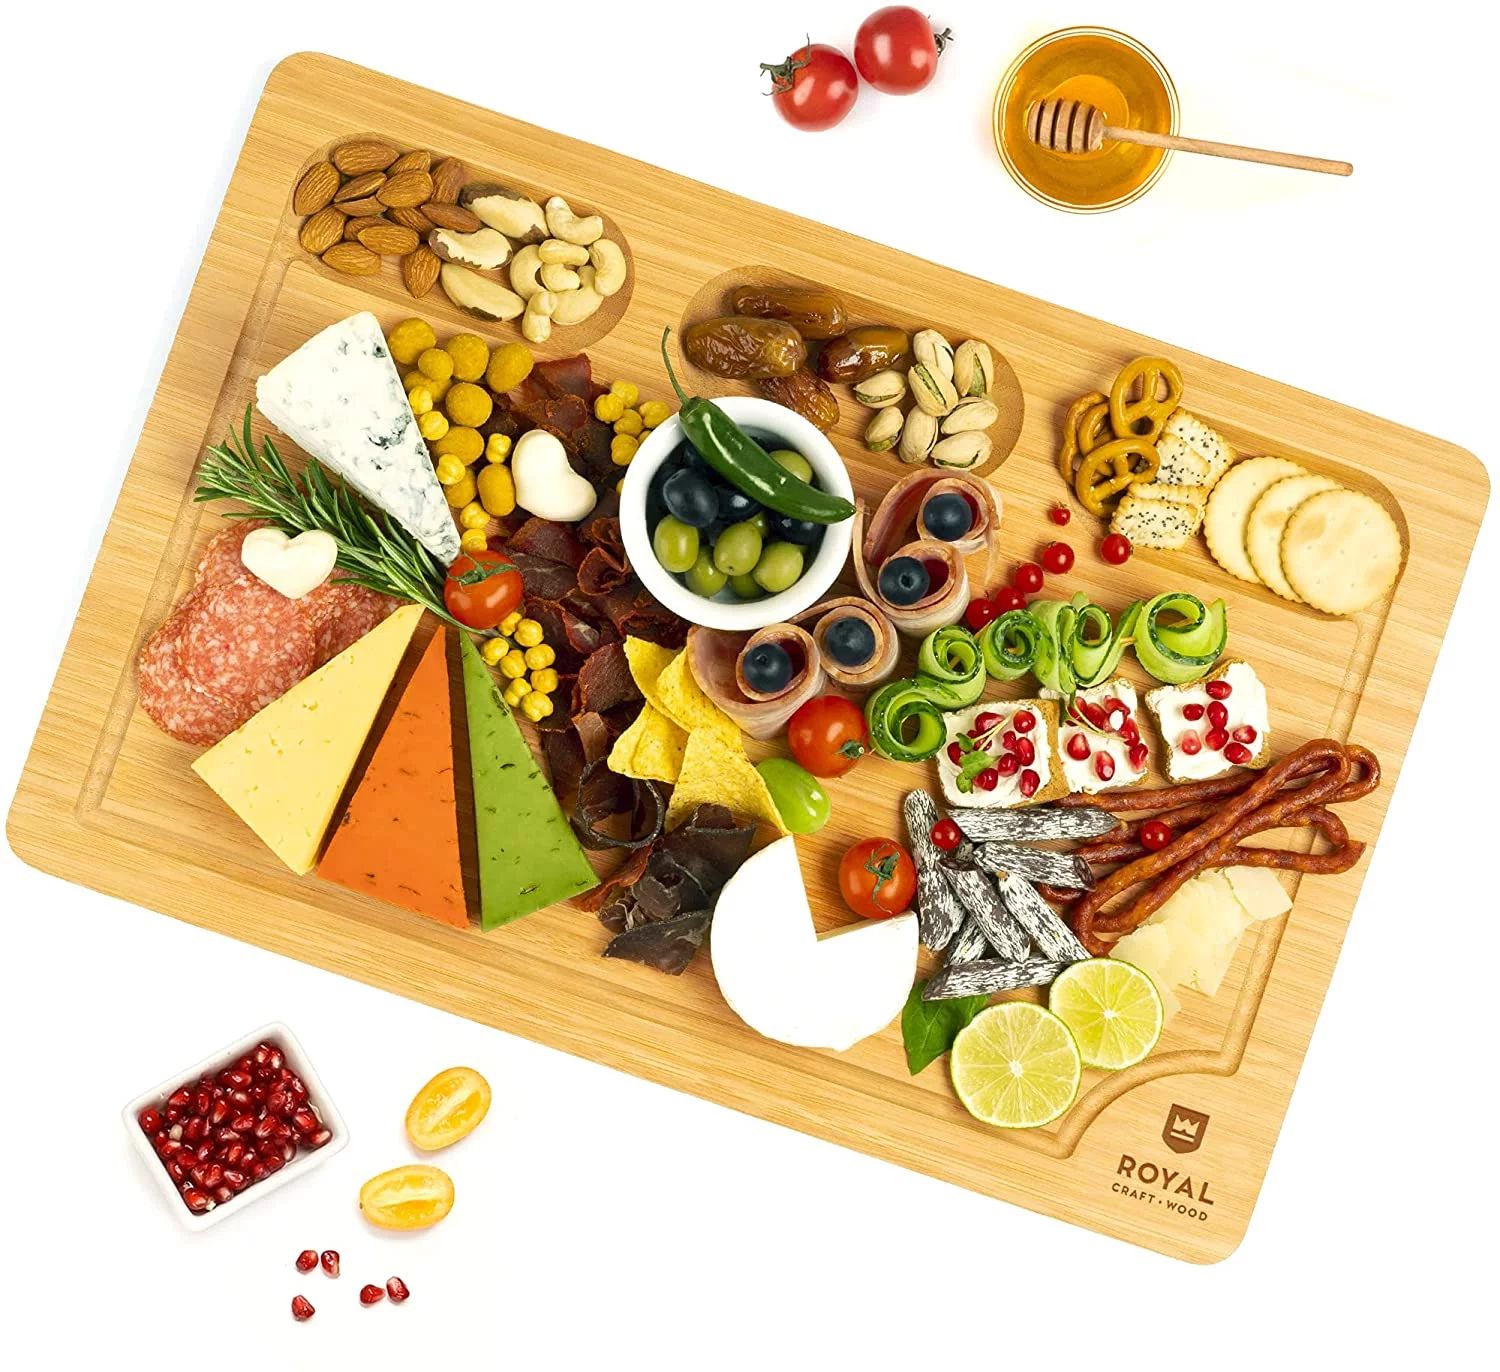 Royal Craft Wood 18" x 12" Bamboo Cutting Board for Kitchen - Cheese and Charcuterie Board / Serv... | Walmart (US)